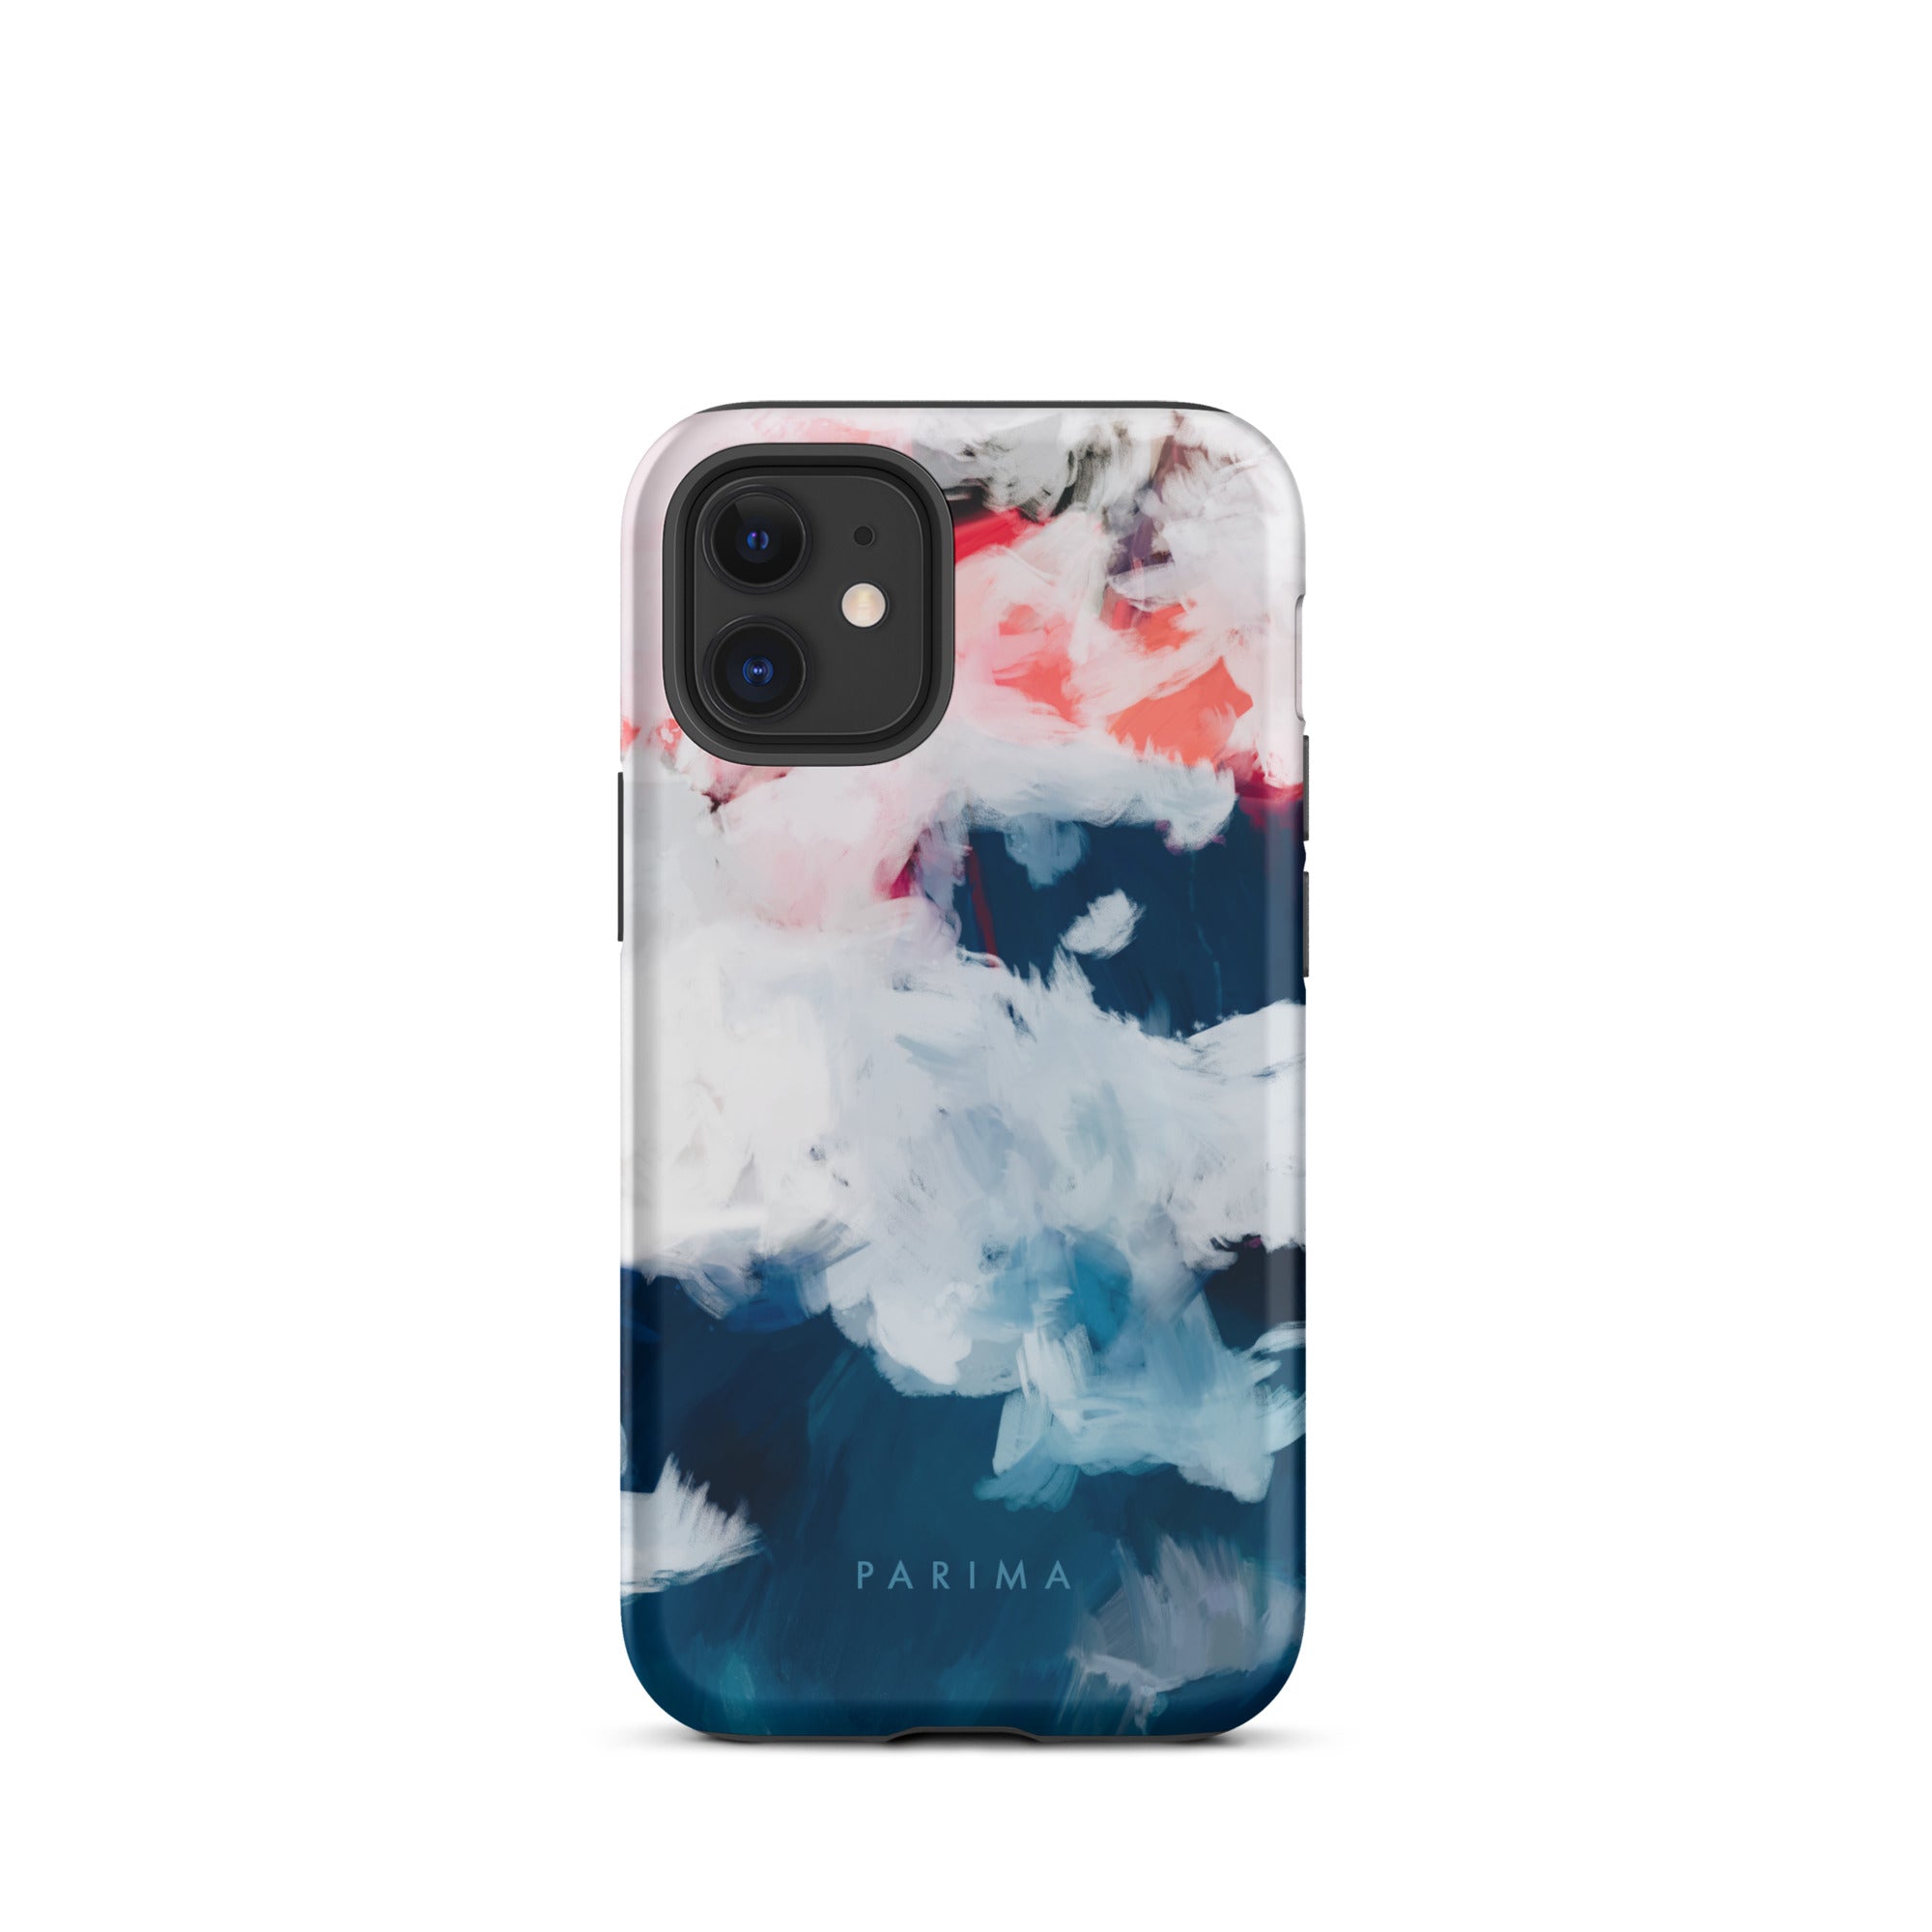 Oceane, blue and pink abstract art on iPhone 12 mini tough case by Parima Studio